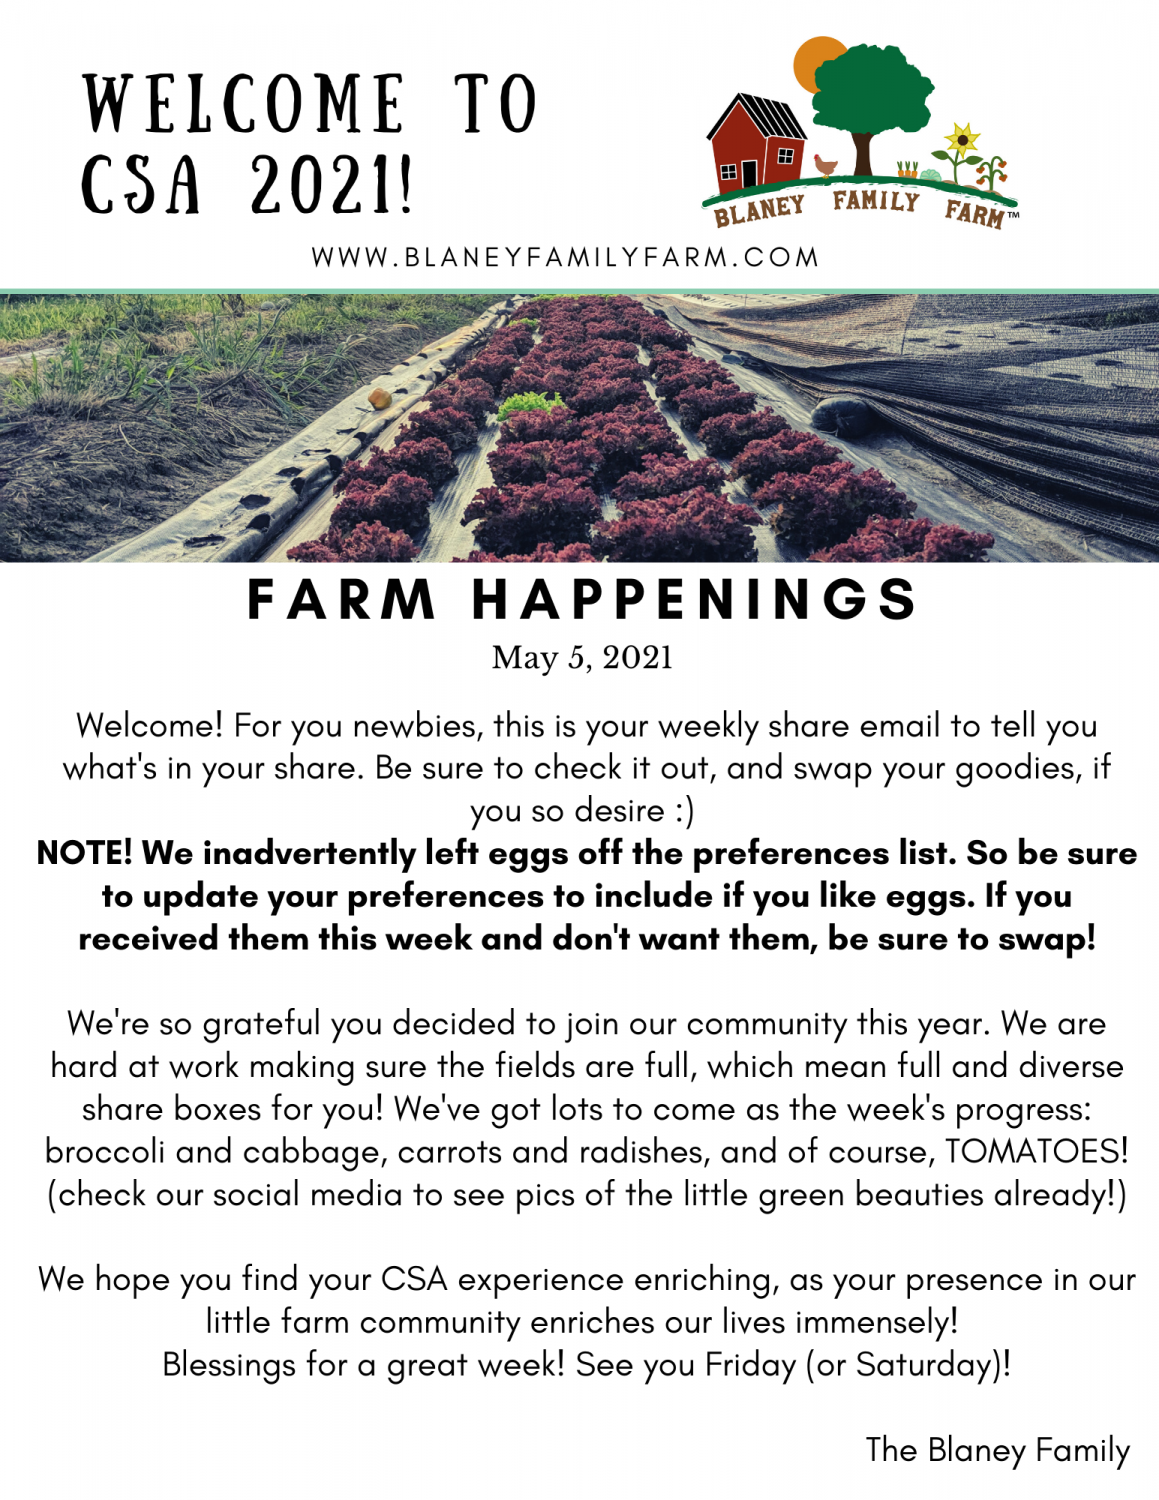 Next Happening: Welcome to CSA and Farm Happenings!